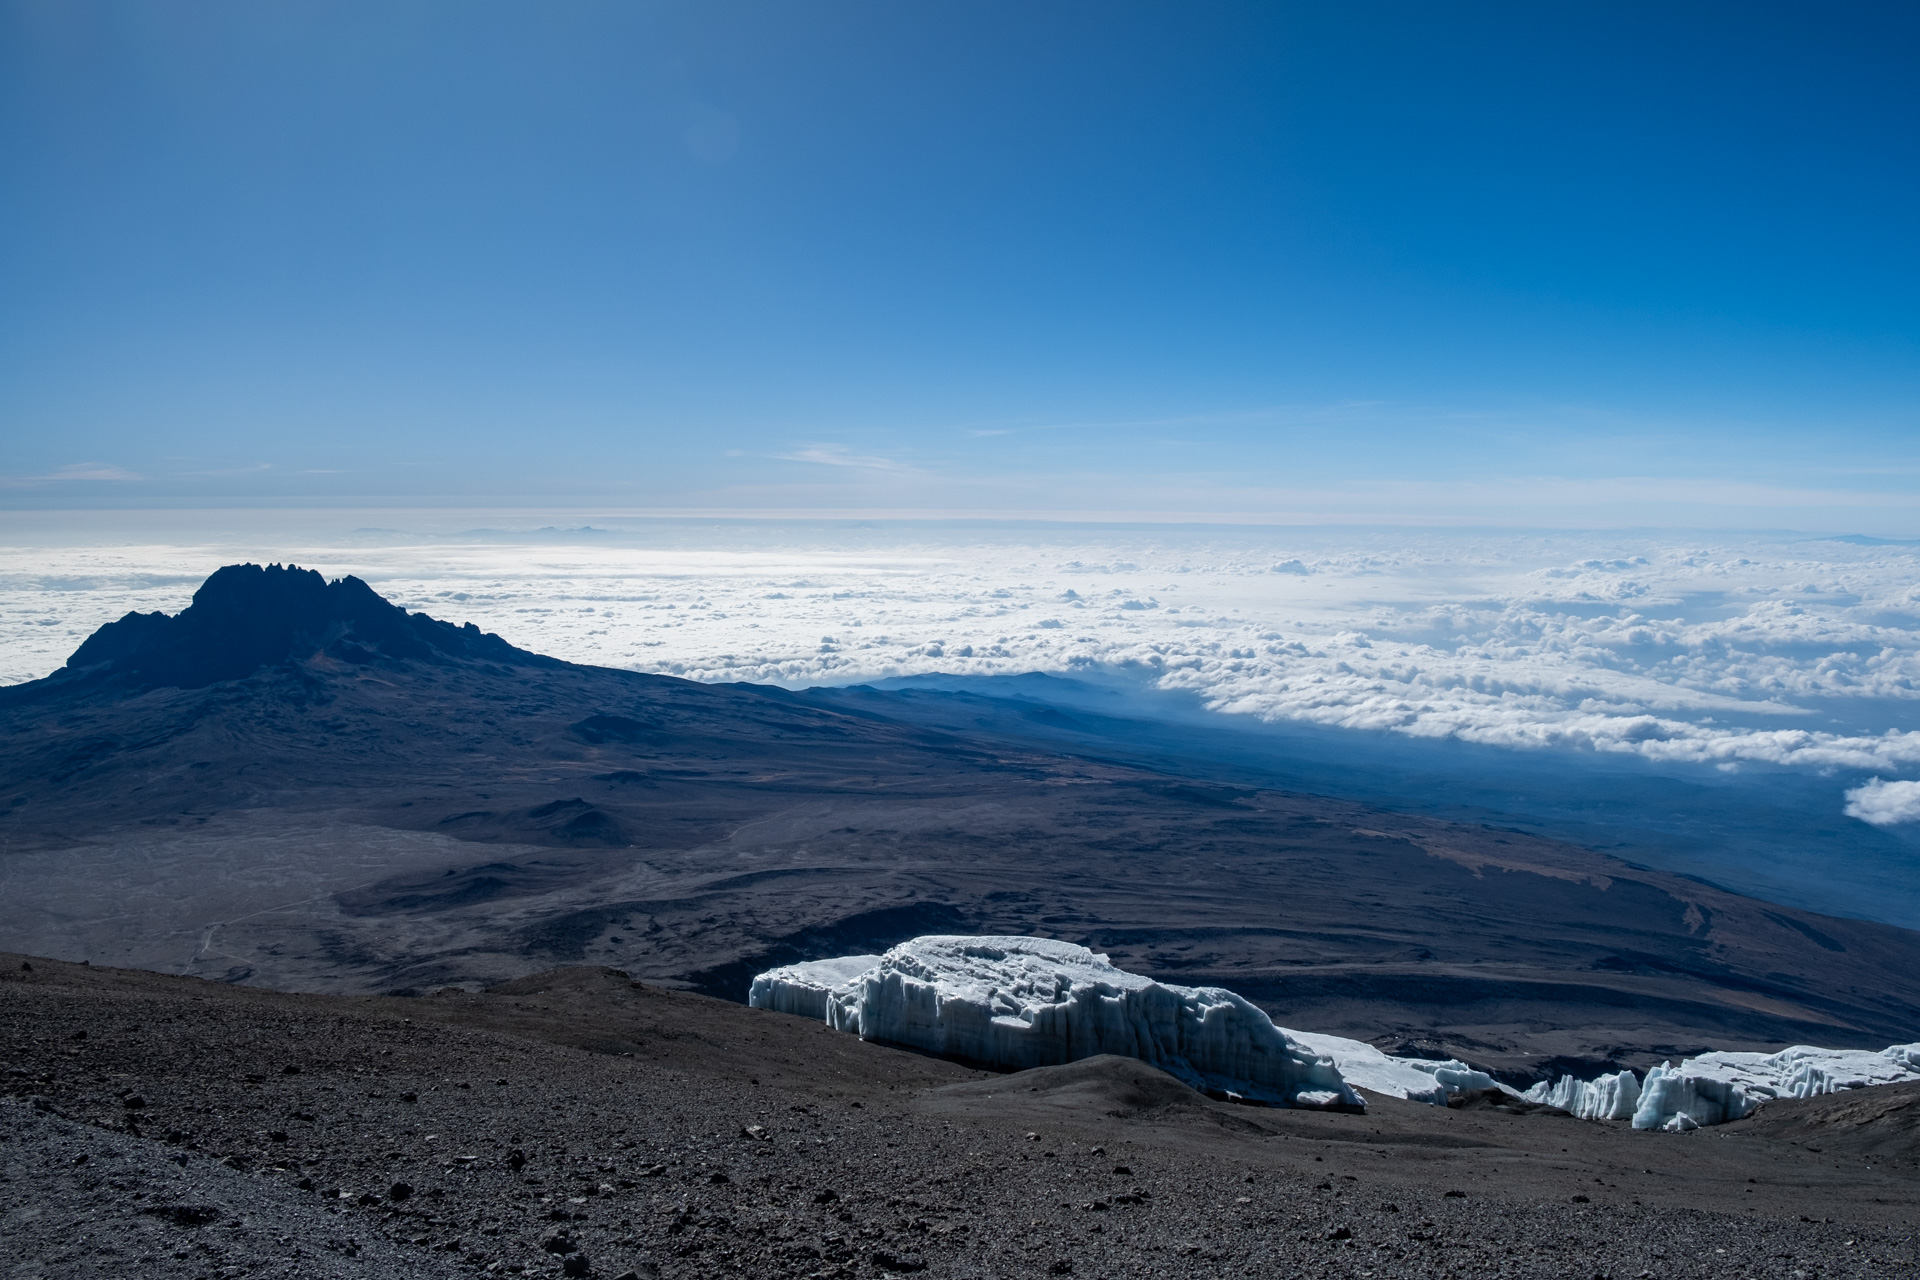 One of Kili's glaciers which gives it it's snow-capped appearance